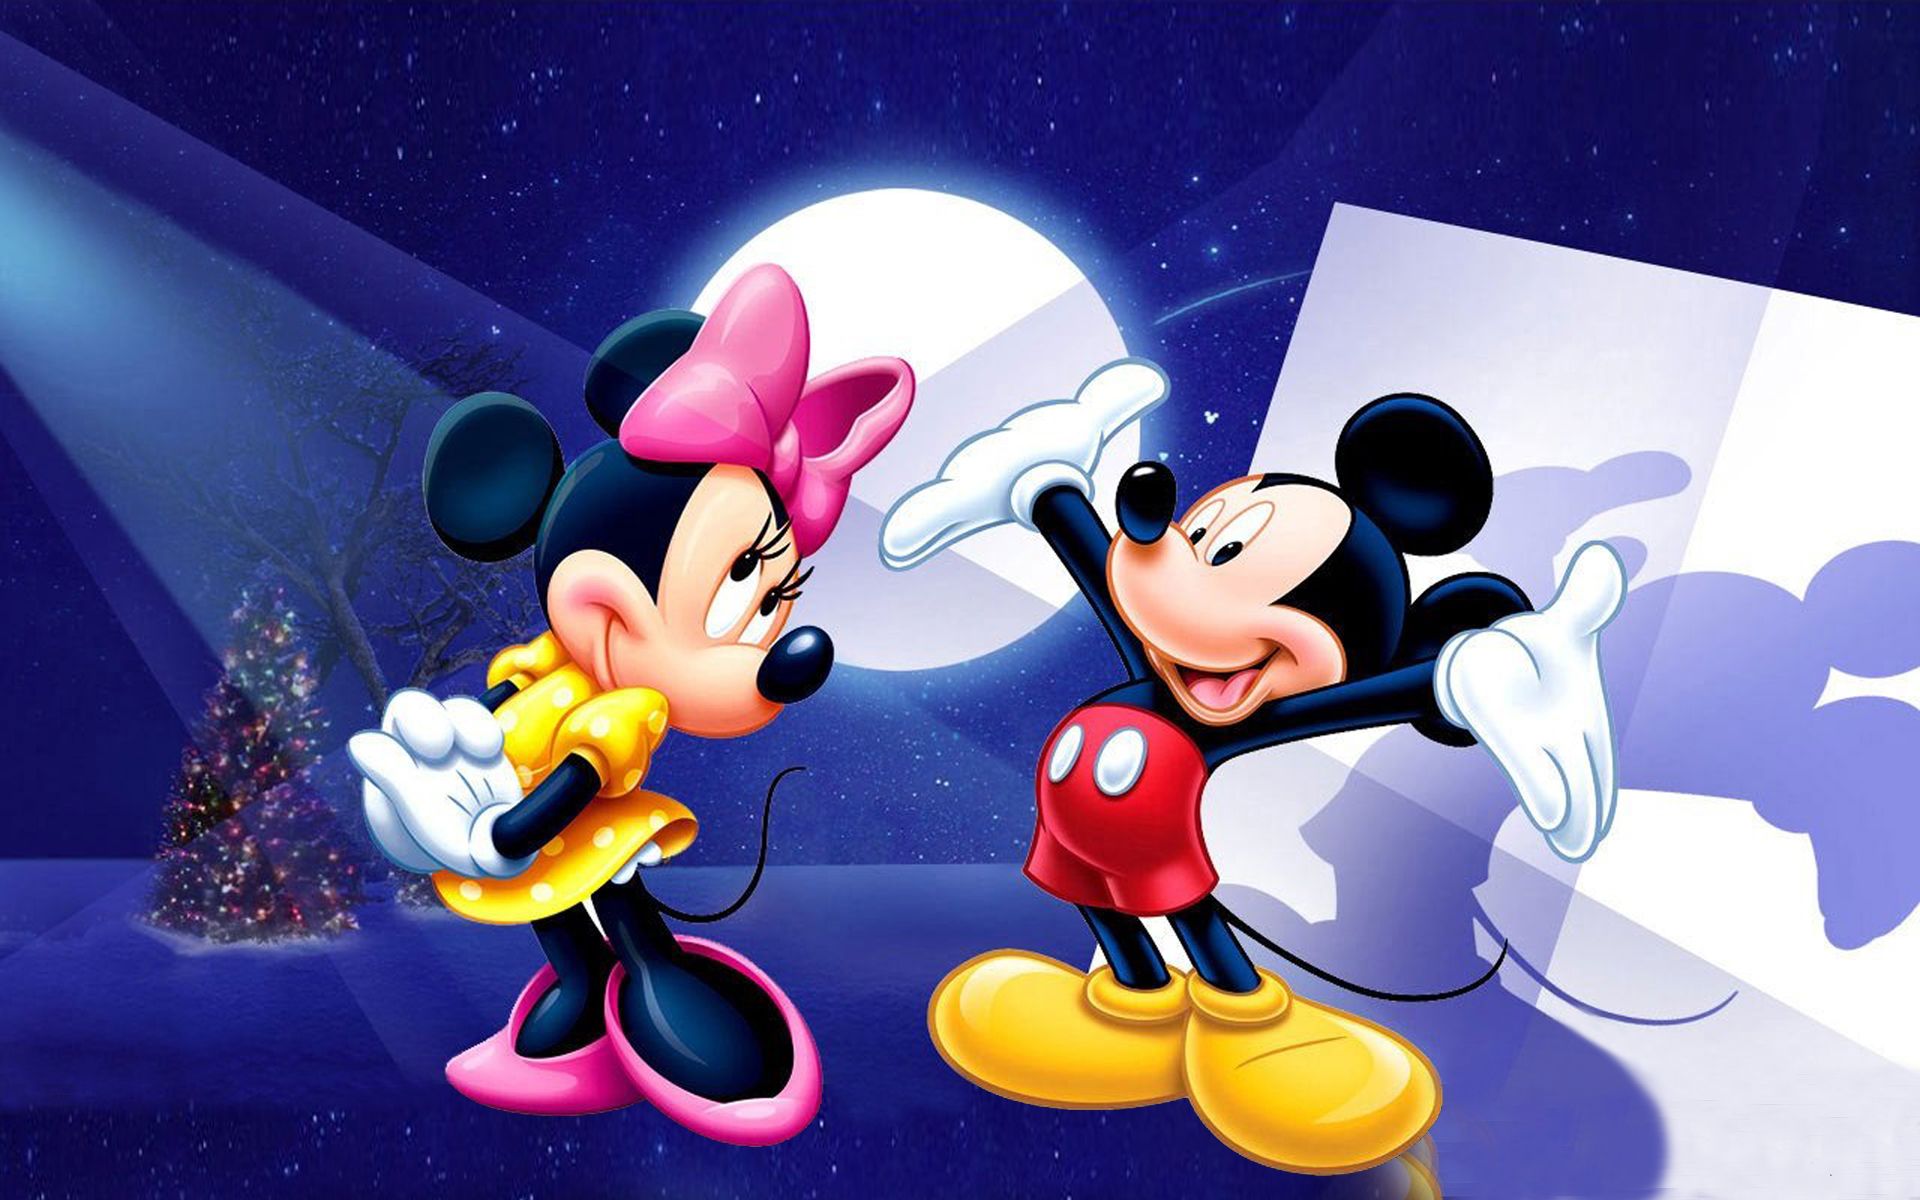 Mickey And Minnie Mouse HD Mobile Wallpaper Free Download, Wallpaper13.com